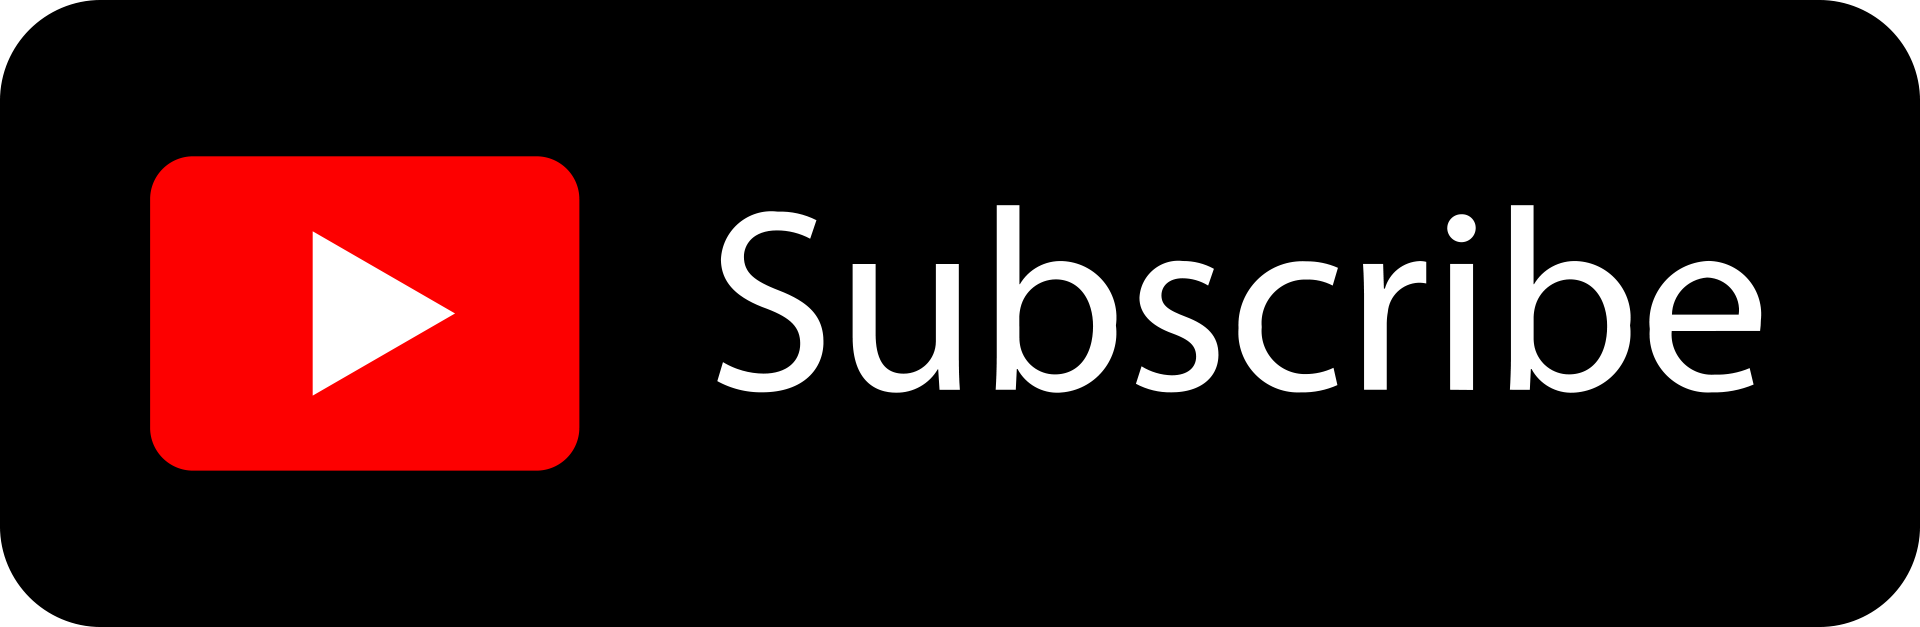 youtube subscribe button animation template free download